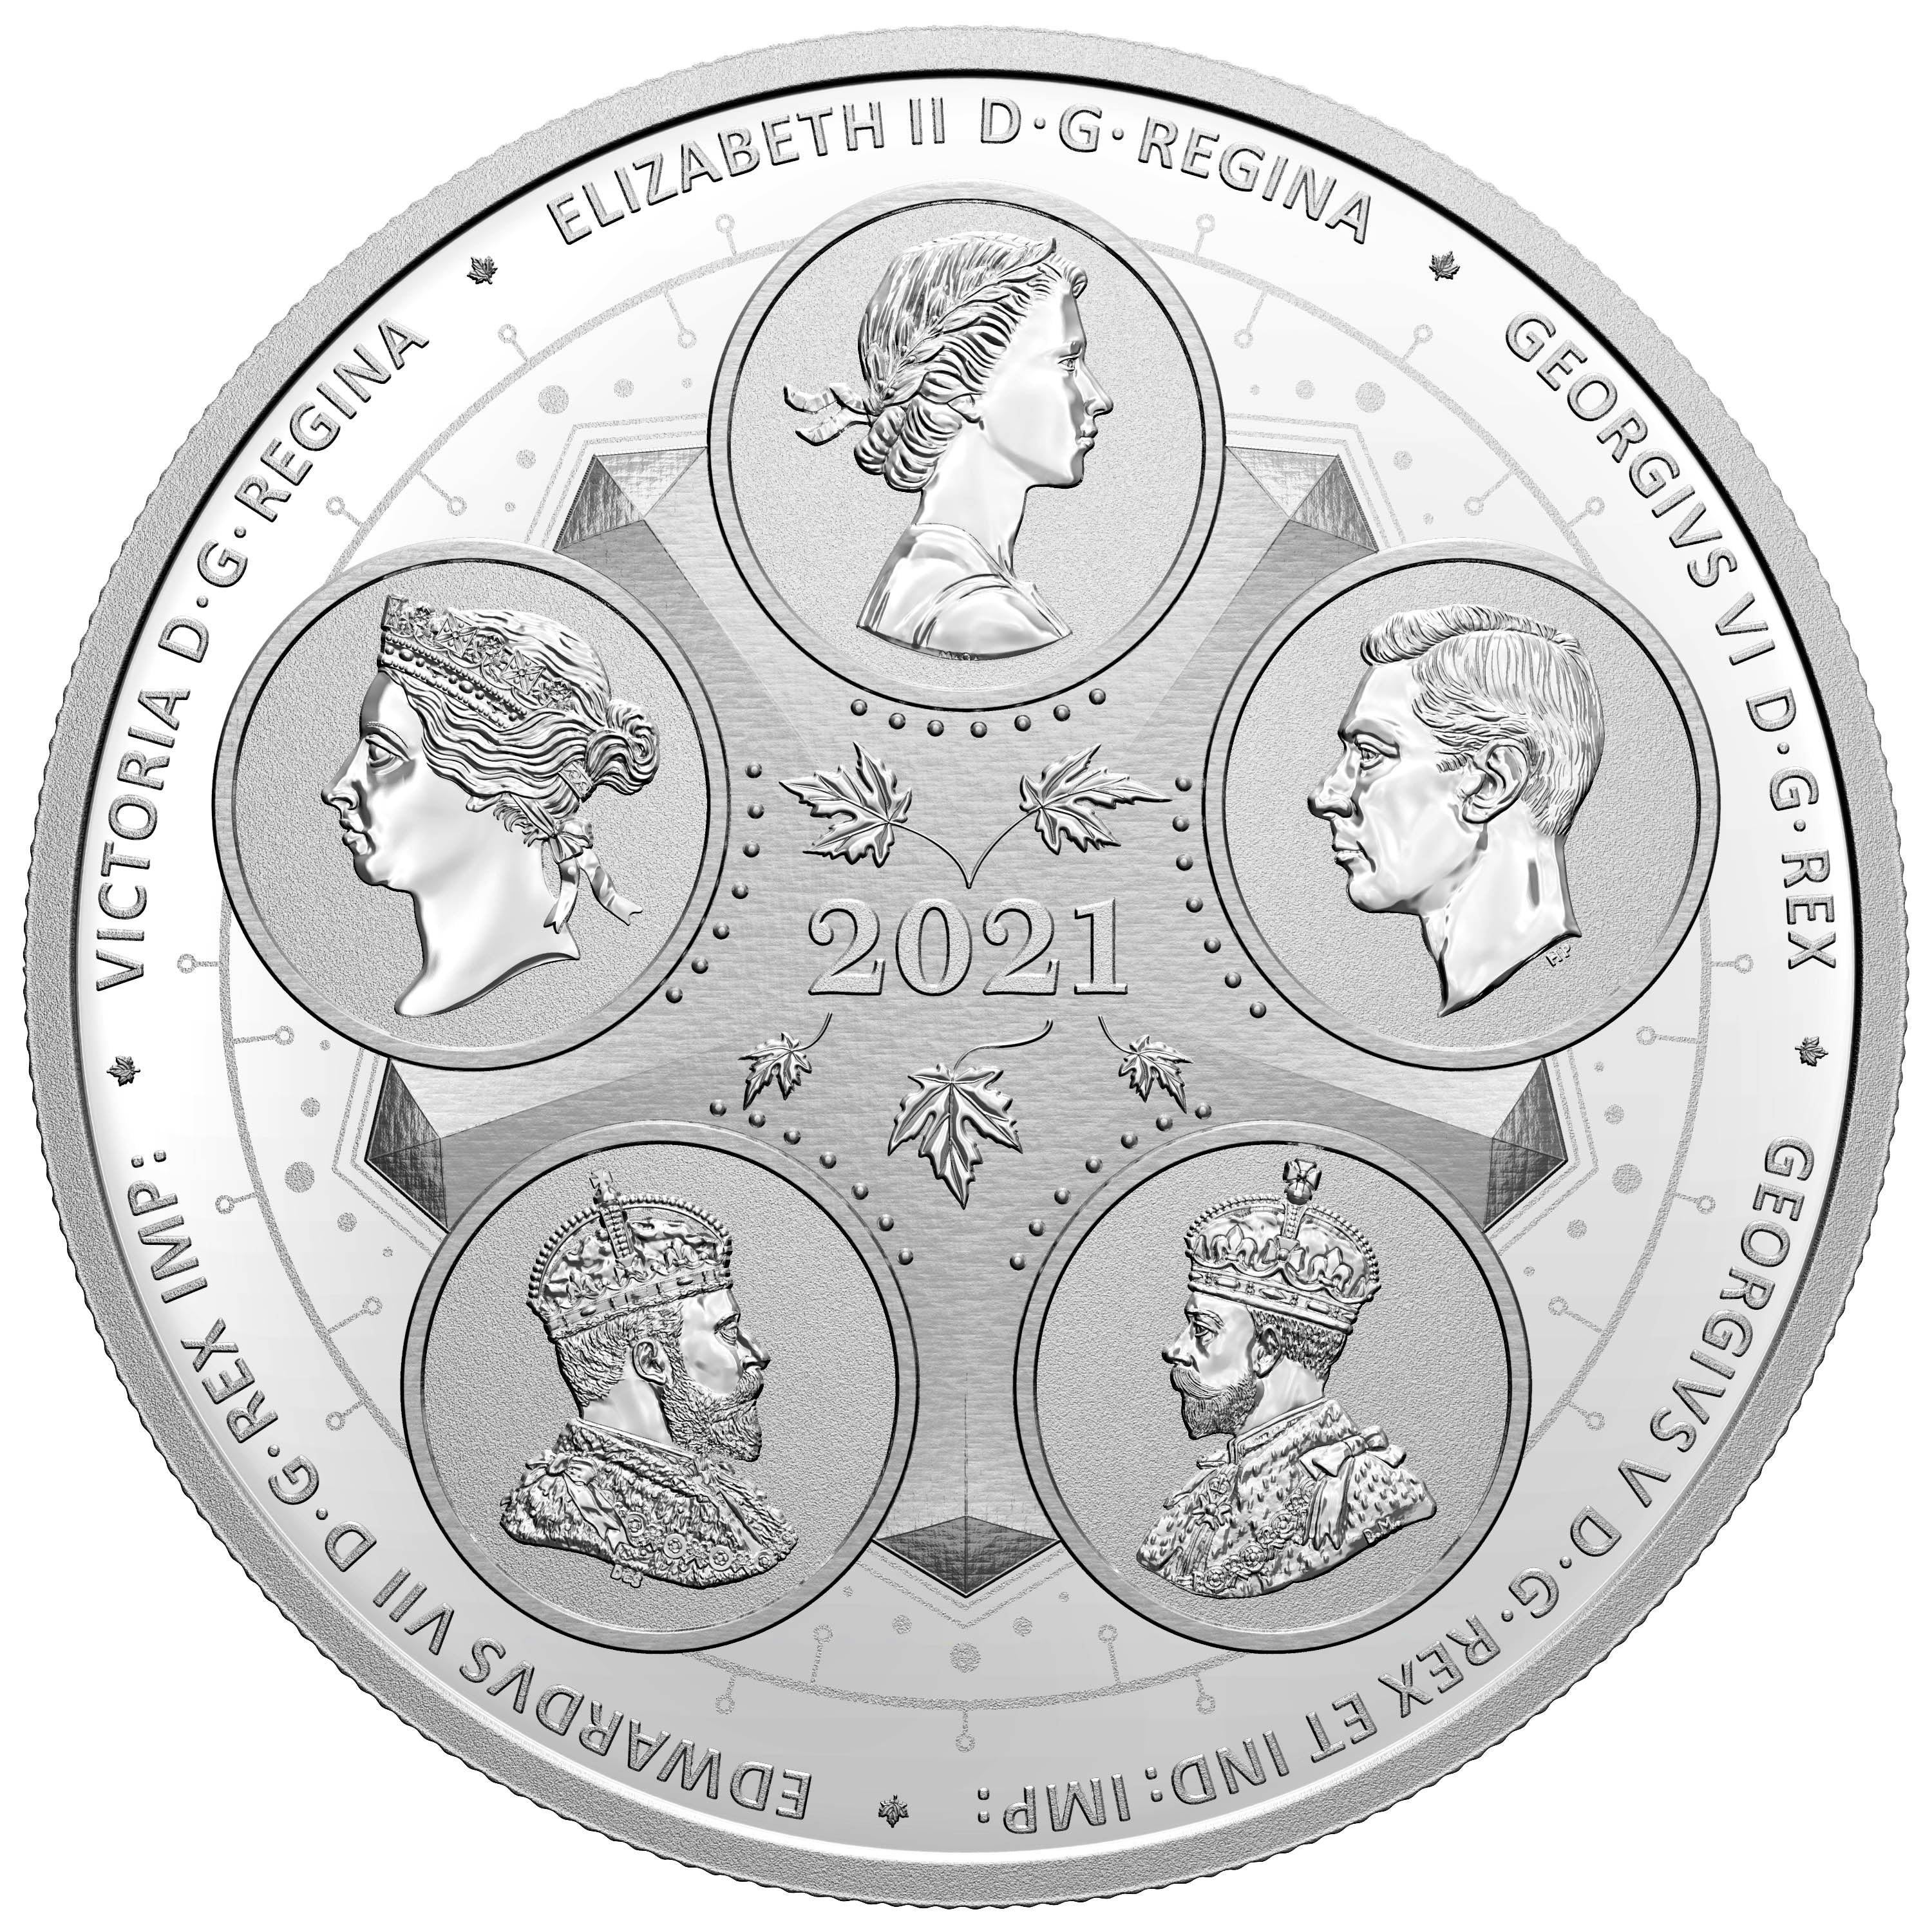 AN EMERGING COUNTRY First 100 Years of Confederation Rail Silver Coin $50 Canada 2021